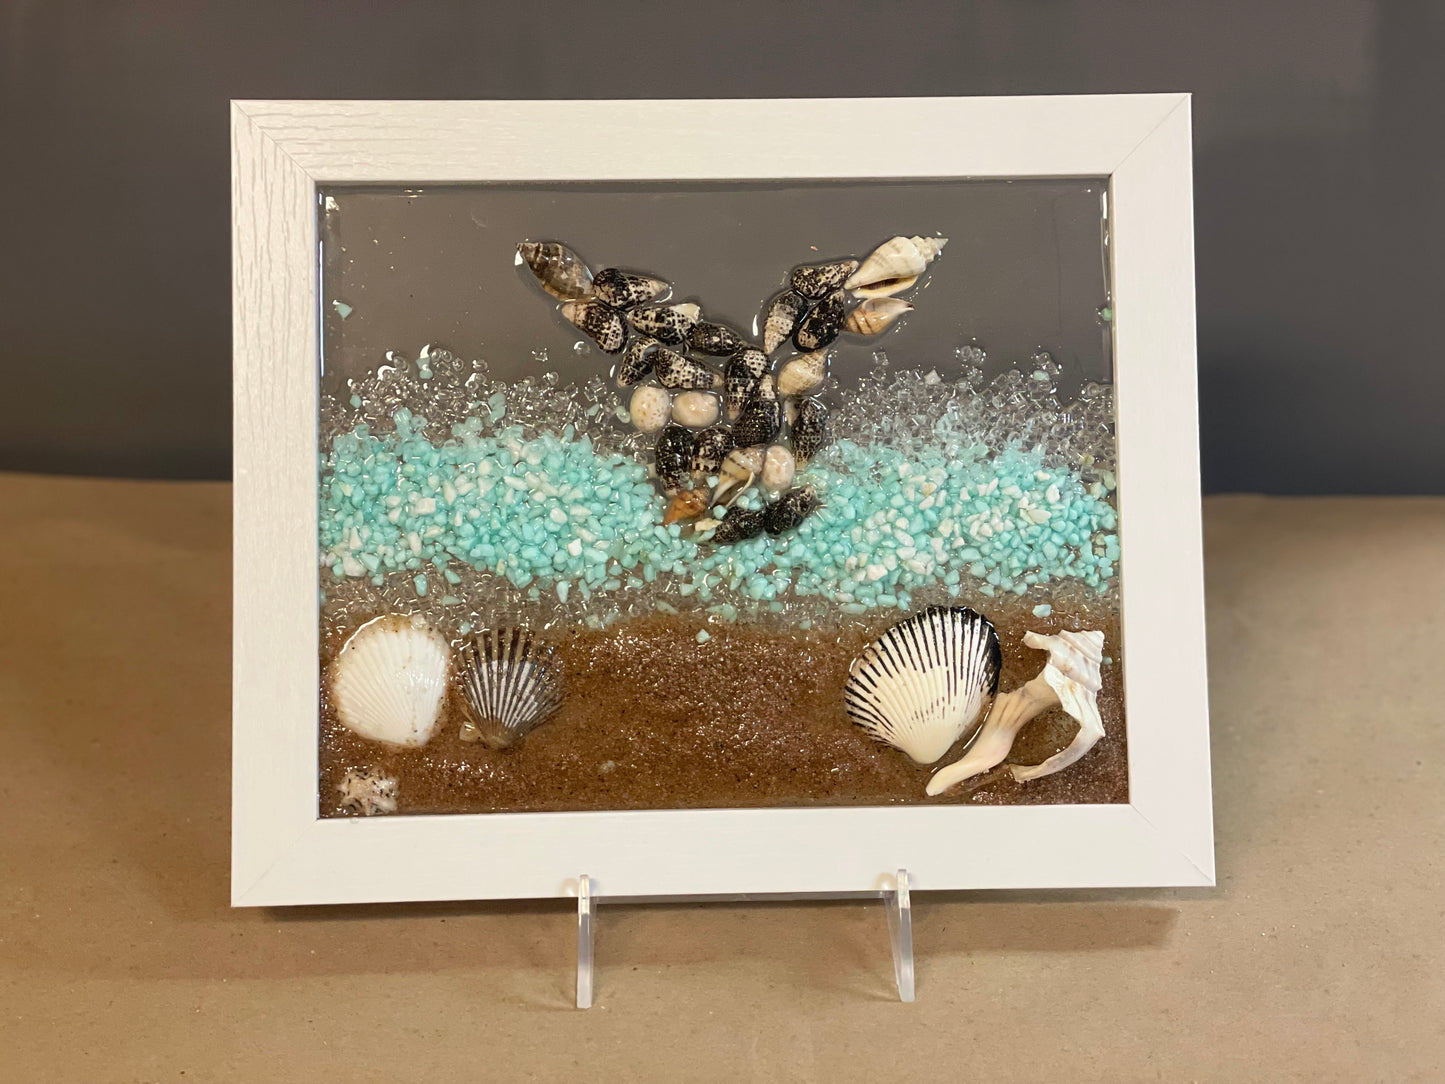 4/5/24 at 7pm Resin Sea-Scapes Workshop